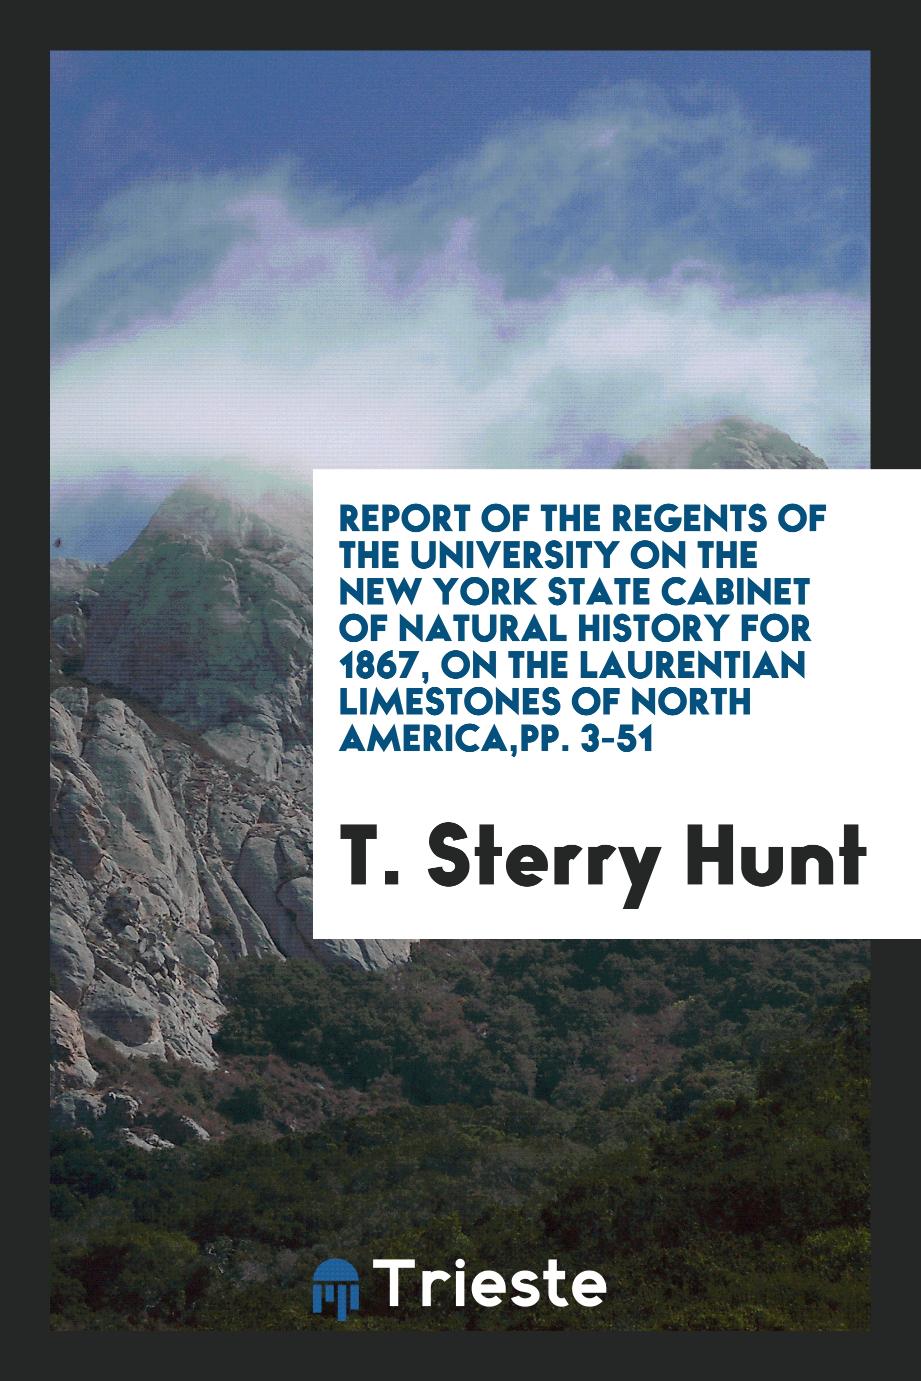 Report of the Regents of the University on the New York State cabinet of natural history for 1867, on the Laurentian Limestones of North America,pp. 3-51